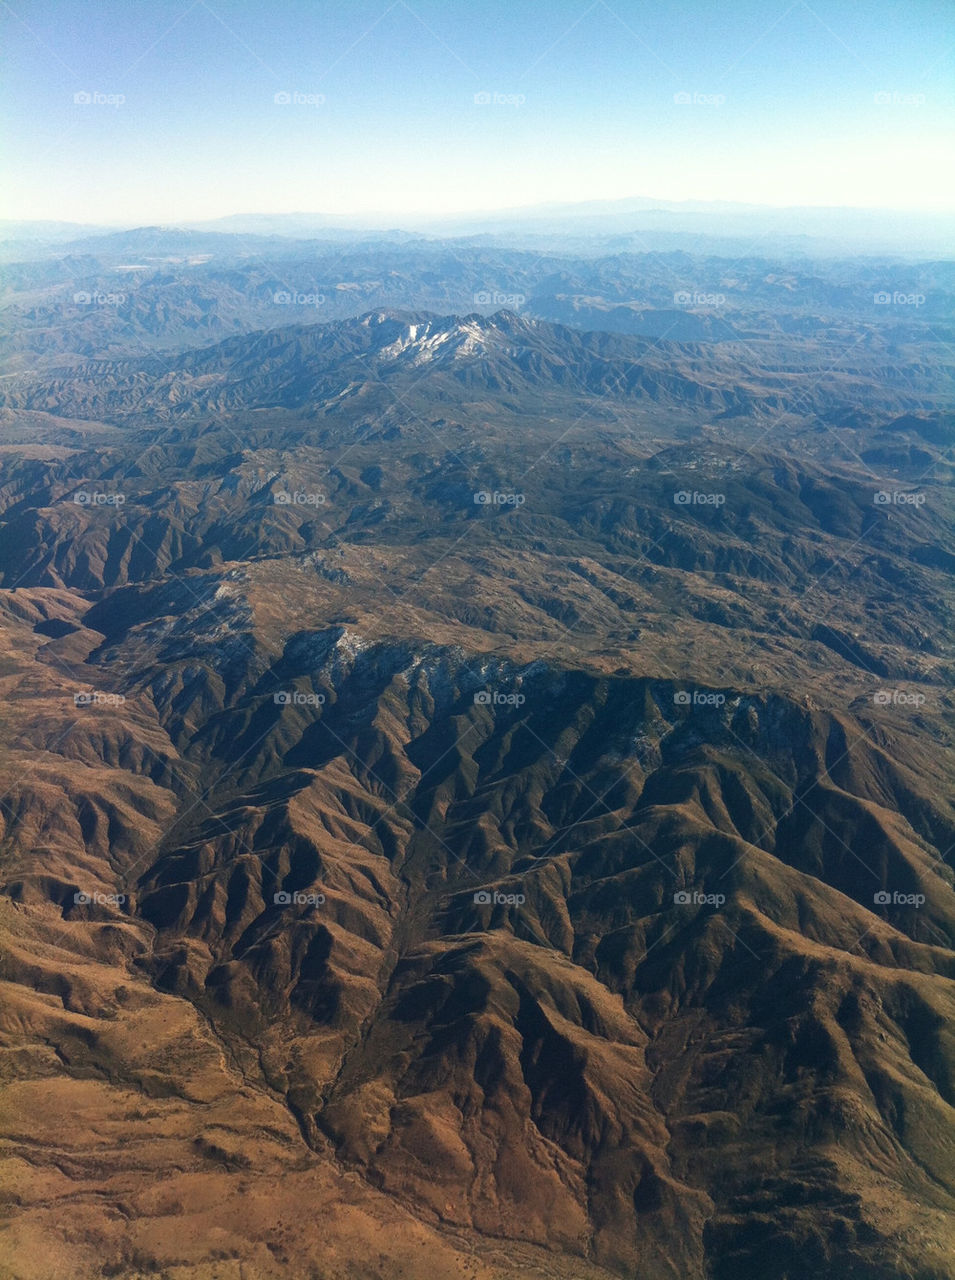 A snapshot over the mountains of the southwest.